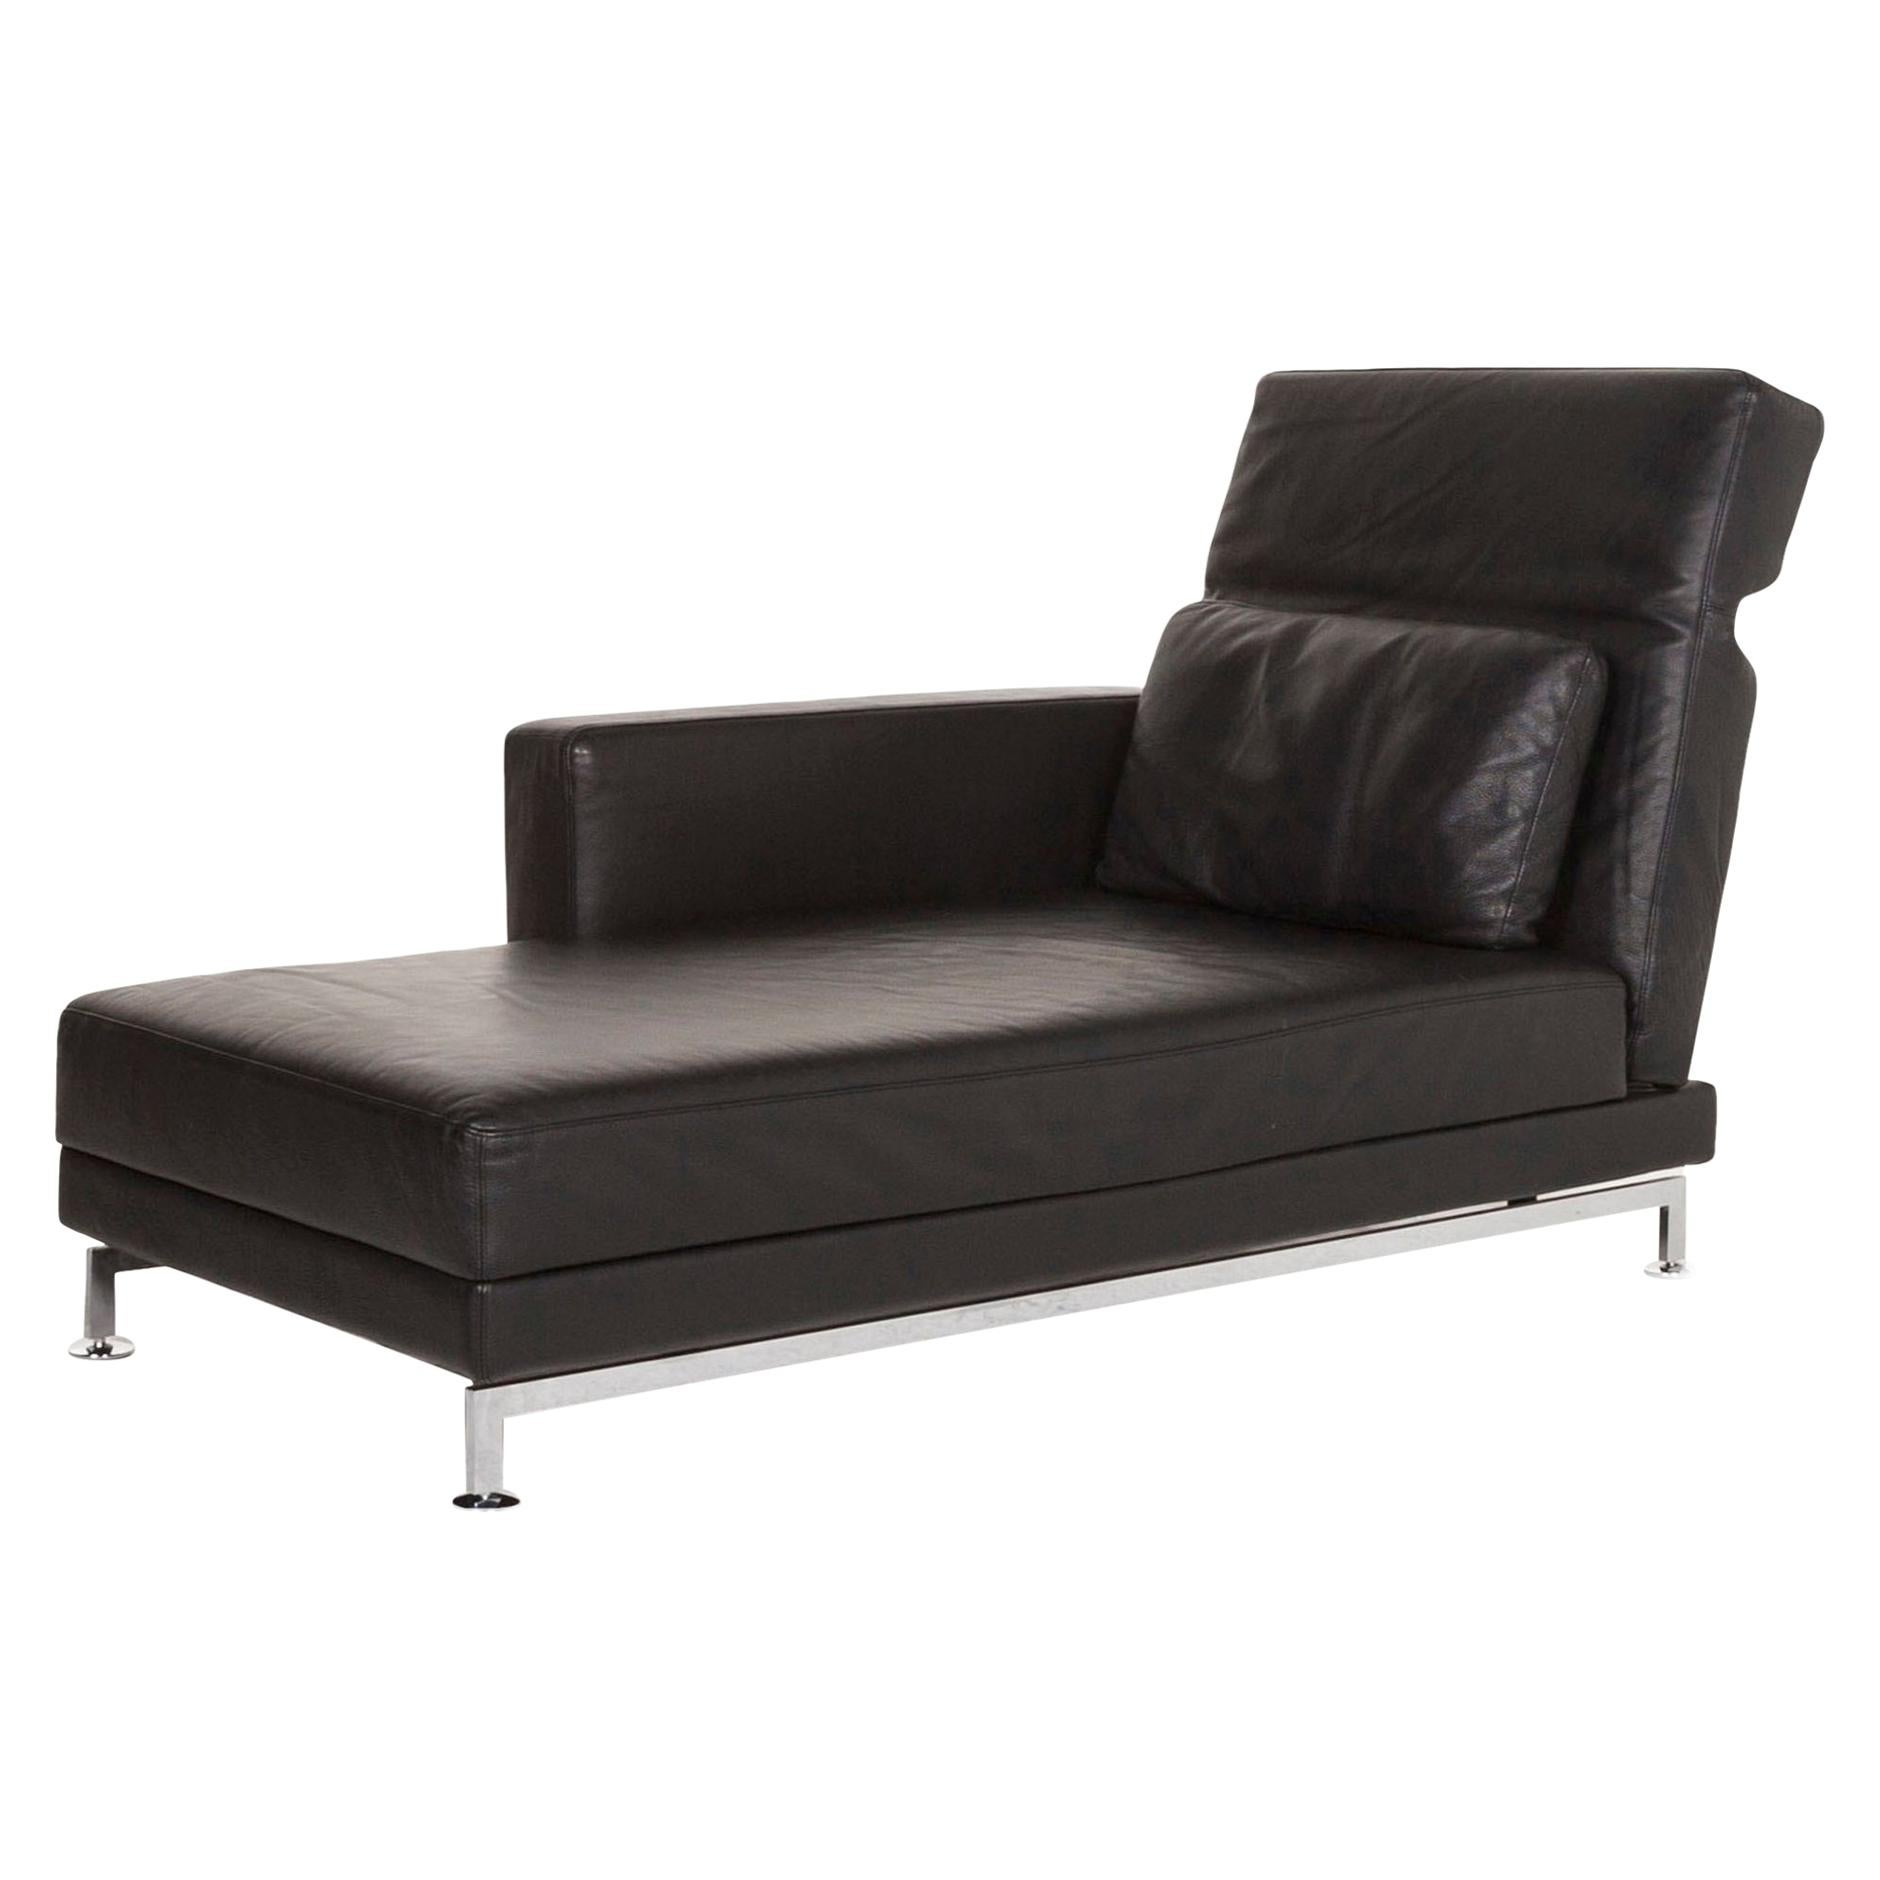 Brühl & Sippold Moule Leather Lounger Black Function Relax Function For Sale